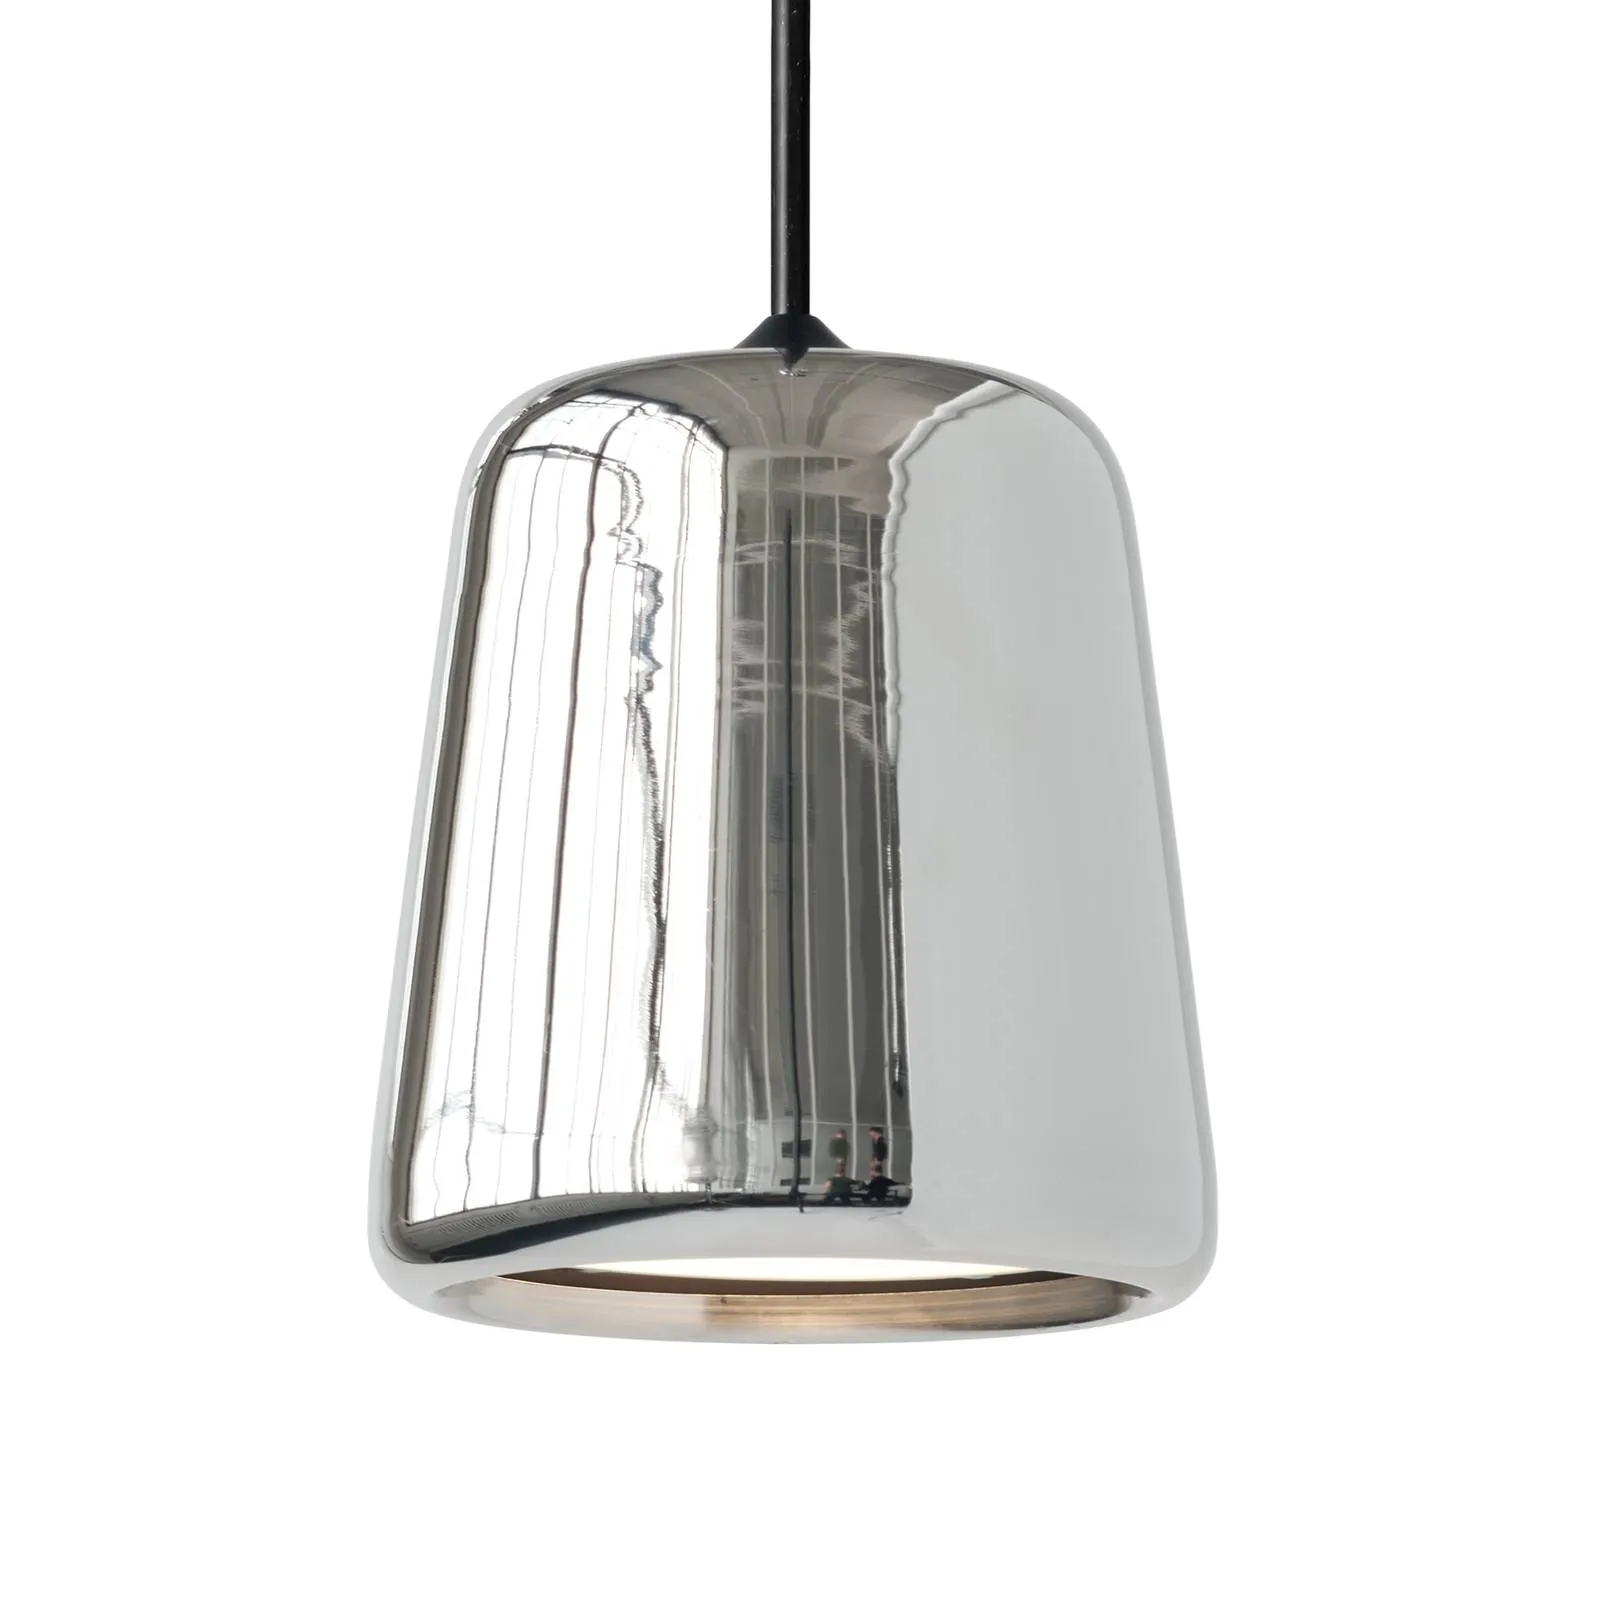 New Works Material New Edition hanging lamp steel